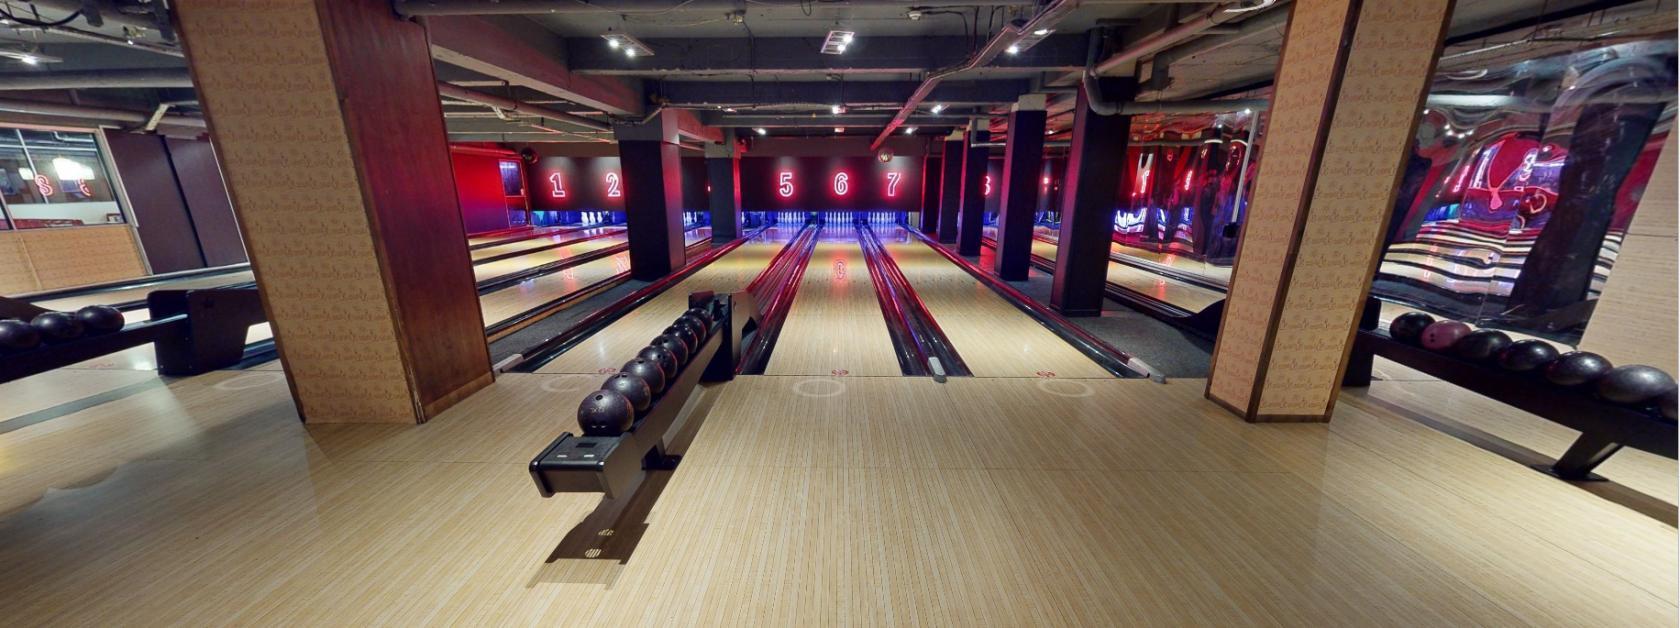 Exclusive Hire Of Bloomsbury Bowling Lanes , Bloomsbury Bowling Lanes & The Kingpin Suite photo #1